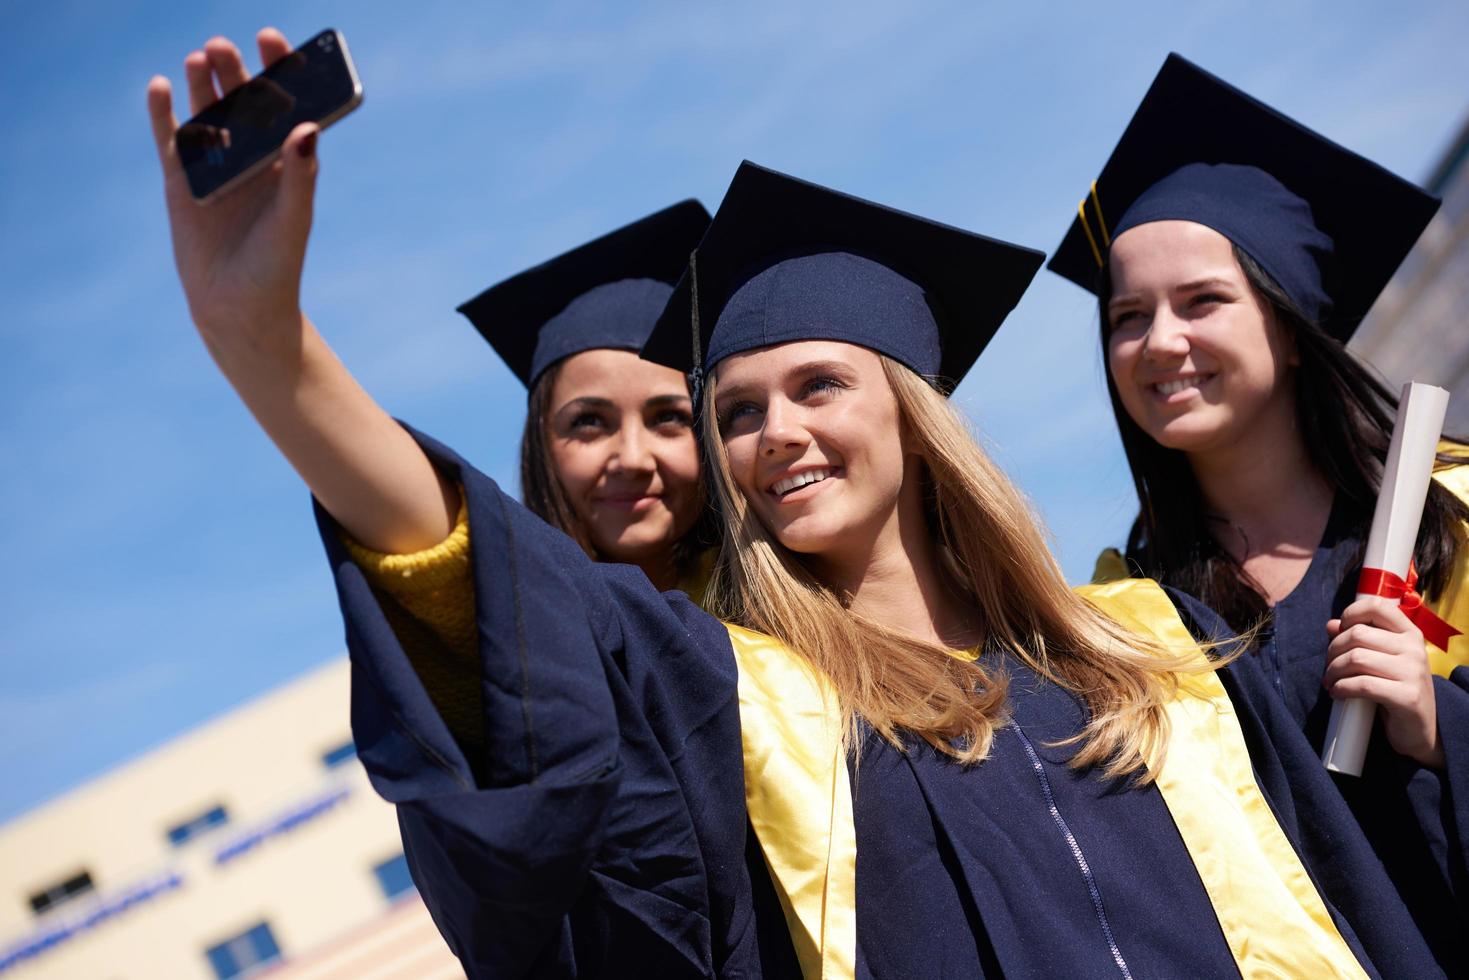 students group in graduates making selfie photo